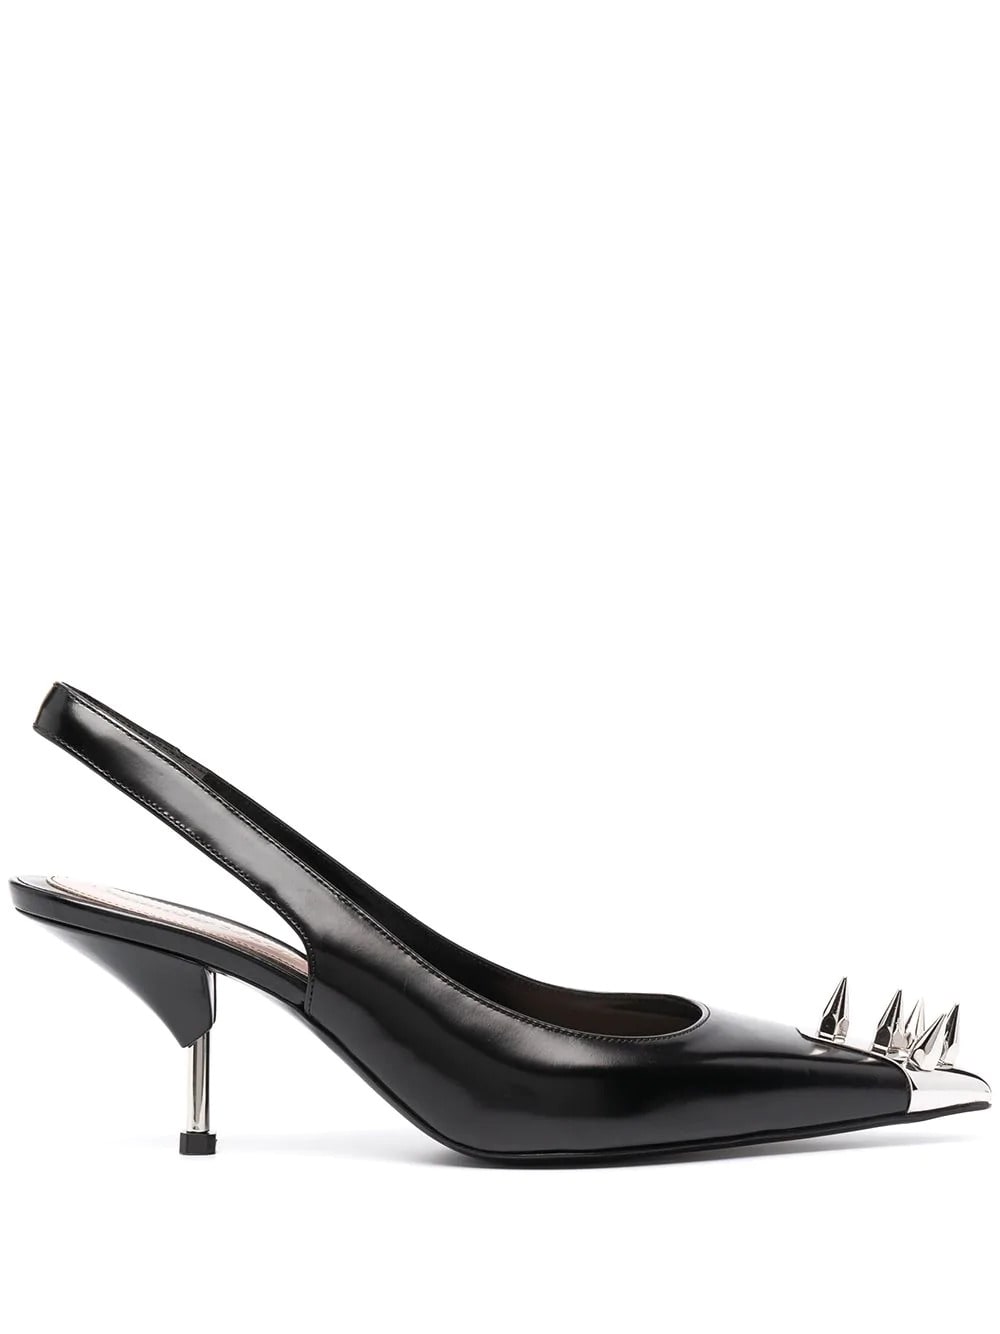 Buy Alexander McQueen punk Studded Slingback online, shop Alexander McQueen shoes with free shipping